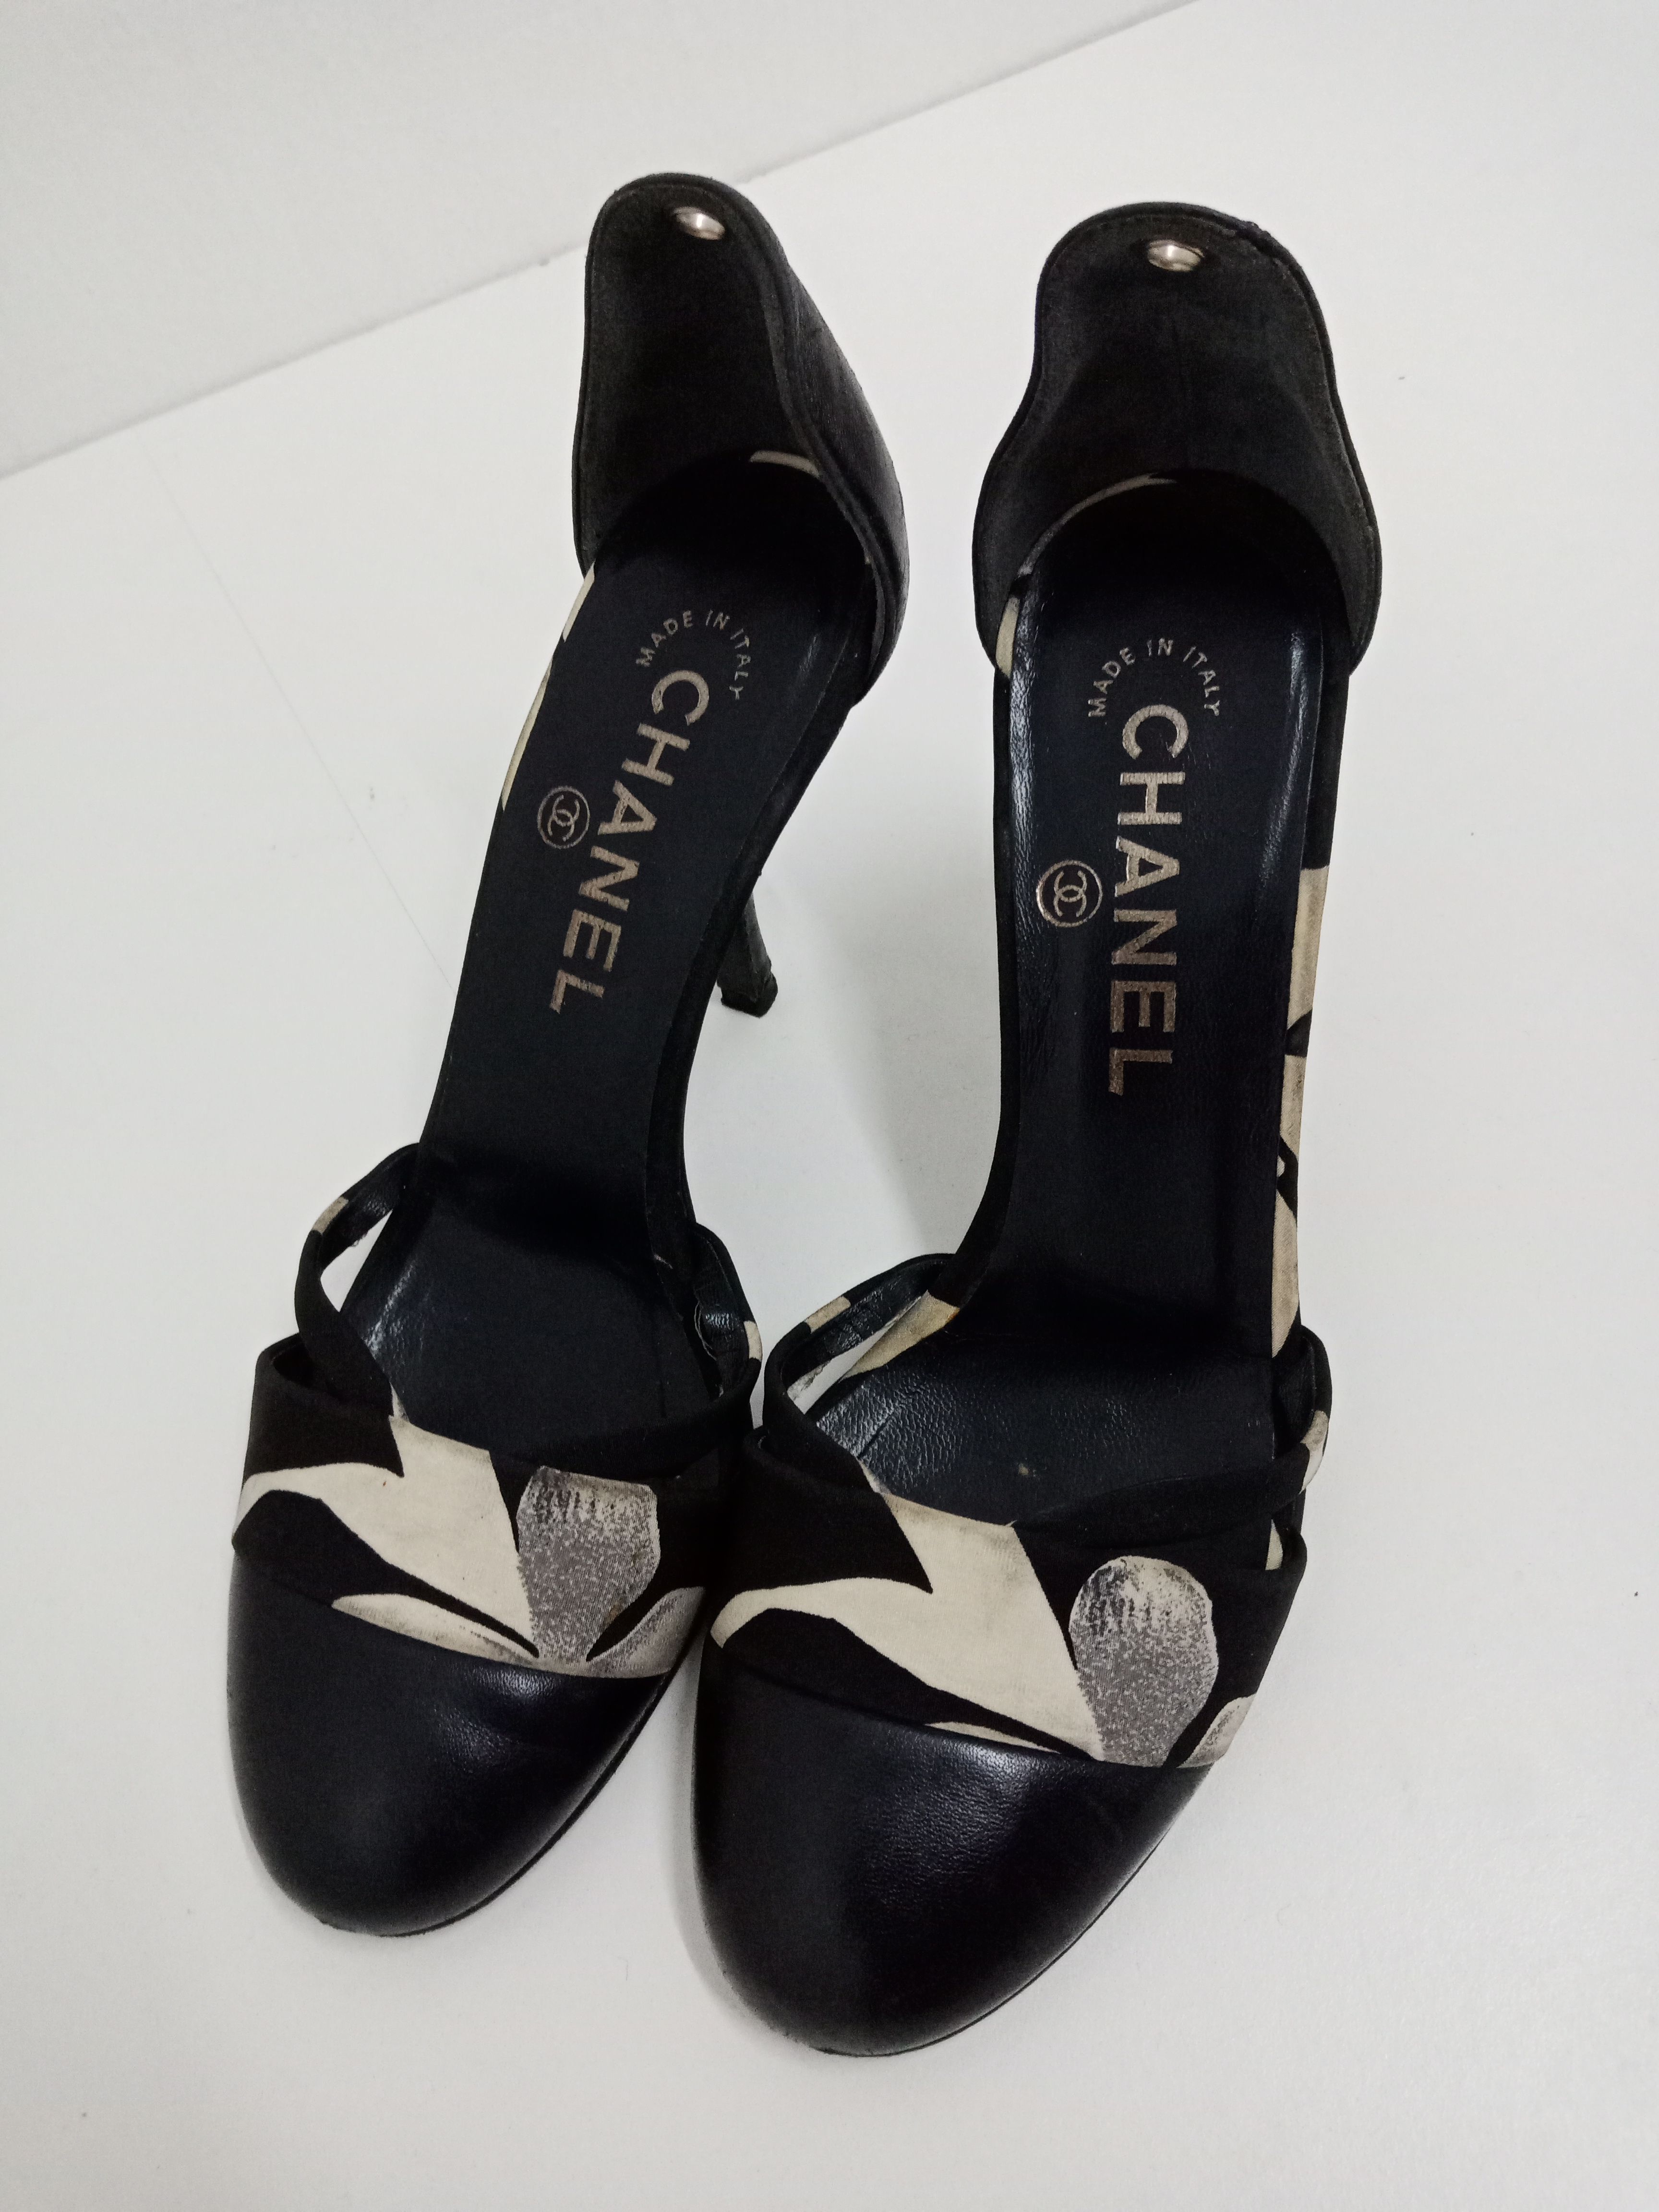 Chanel Chanel Heels Made in Italy | Grailed